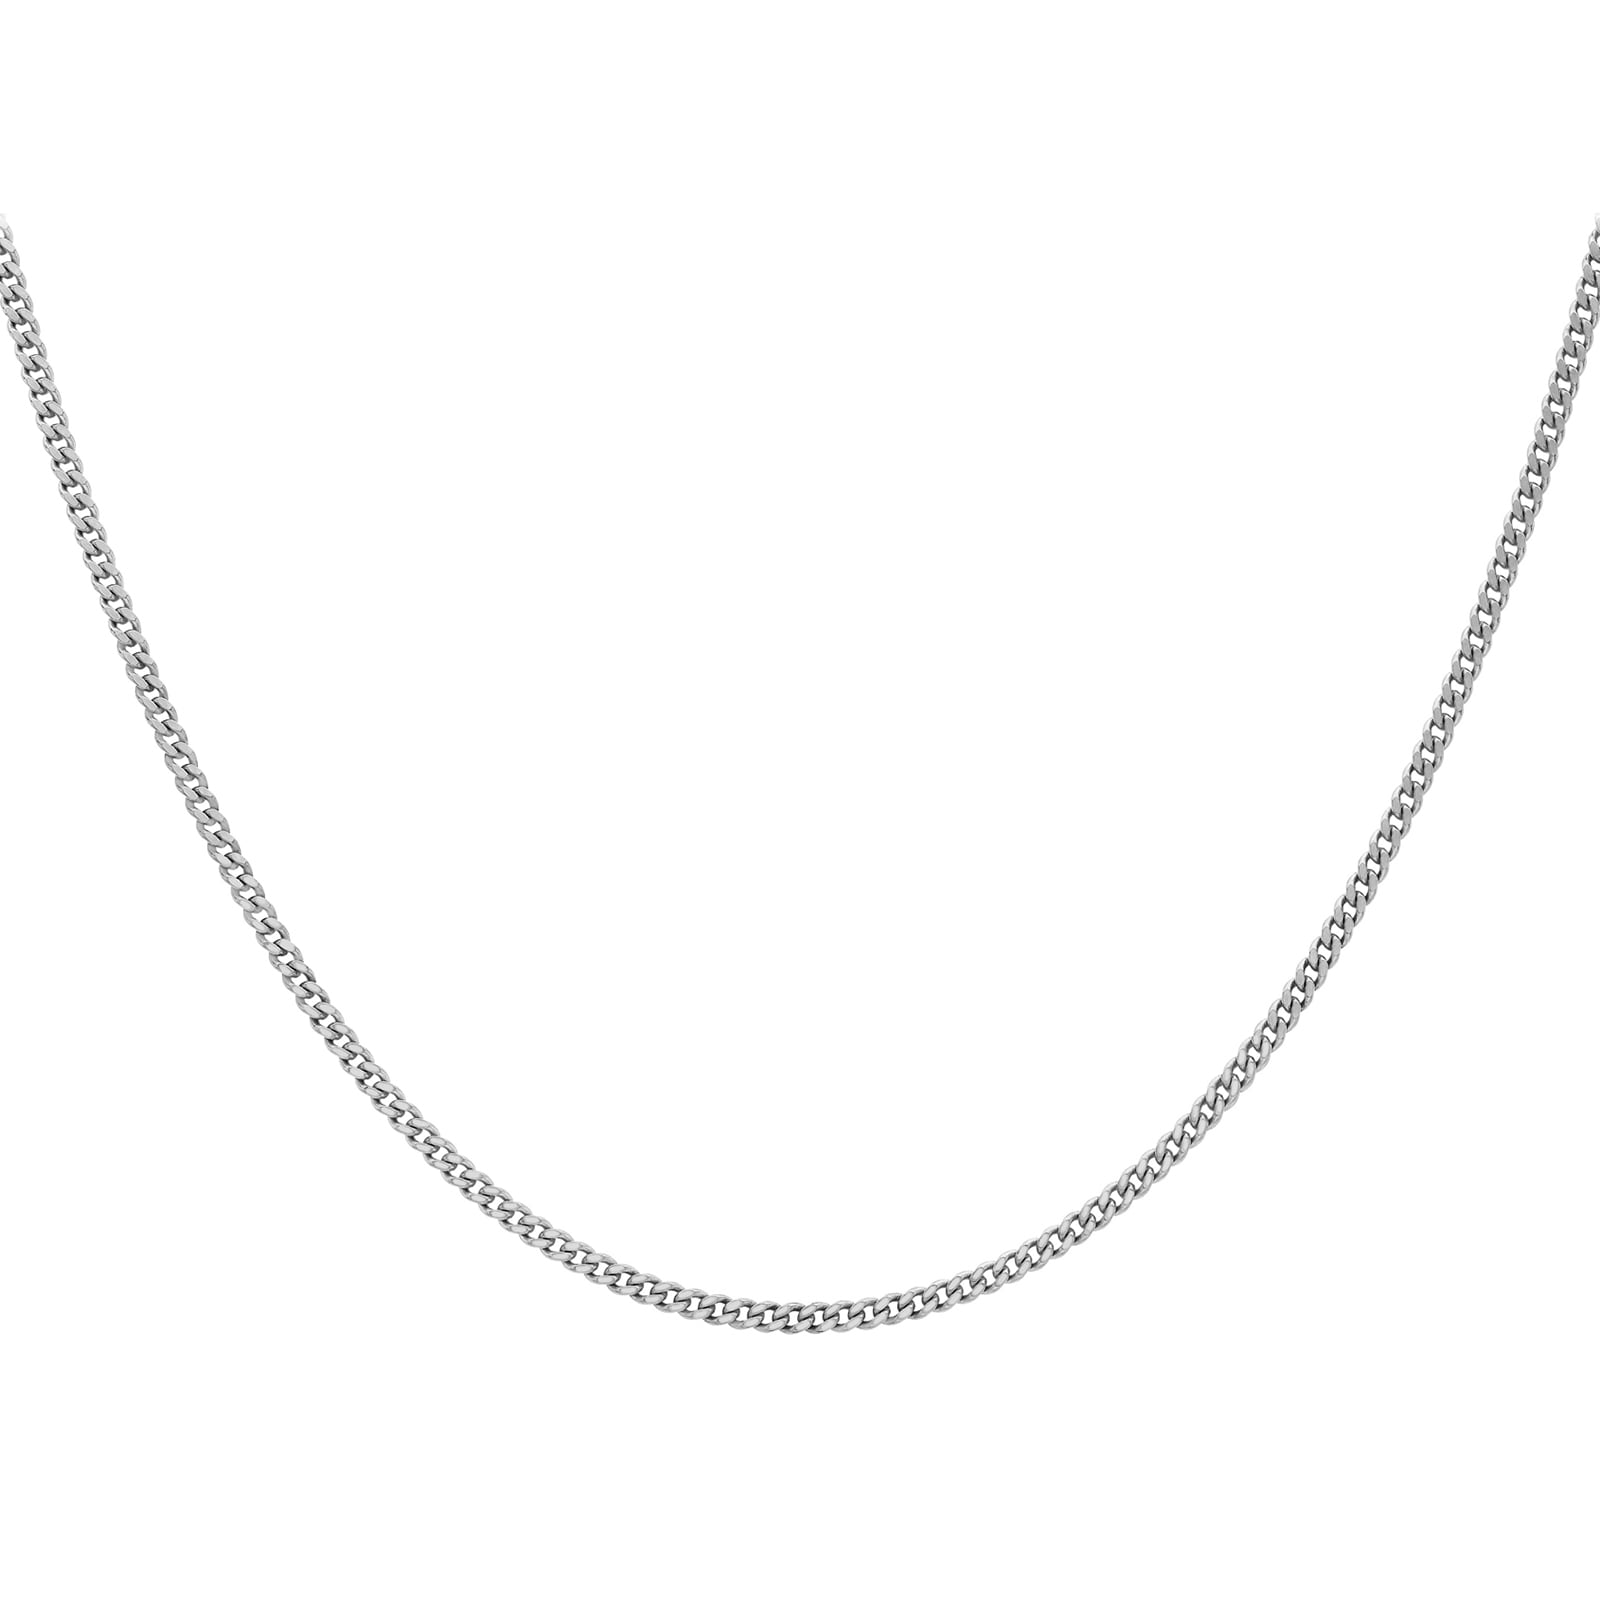 White Gold Necklaces, White Gold Chain Necklaces & Pendants for Women ...